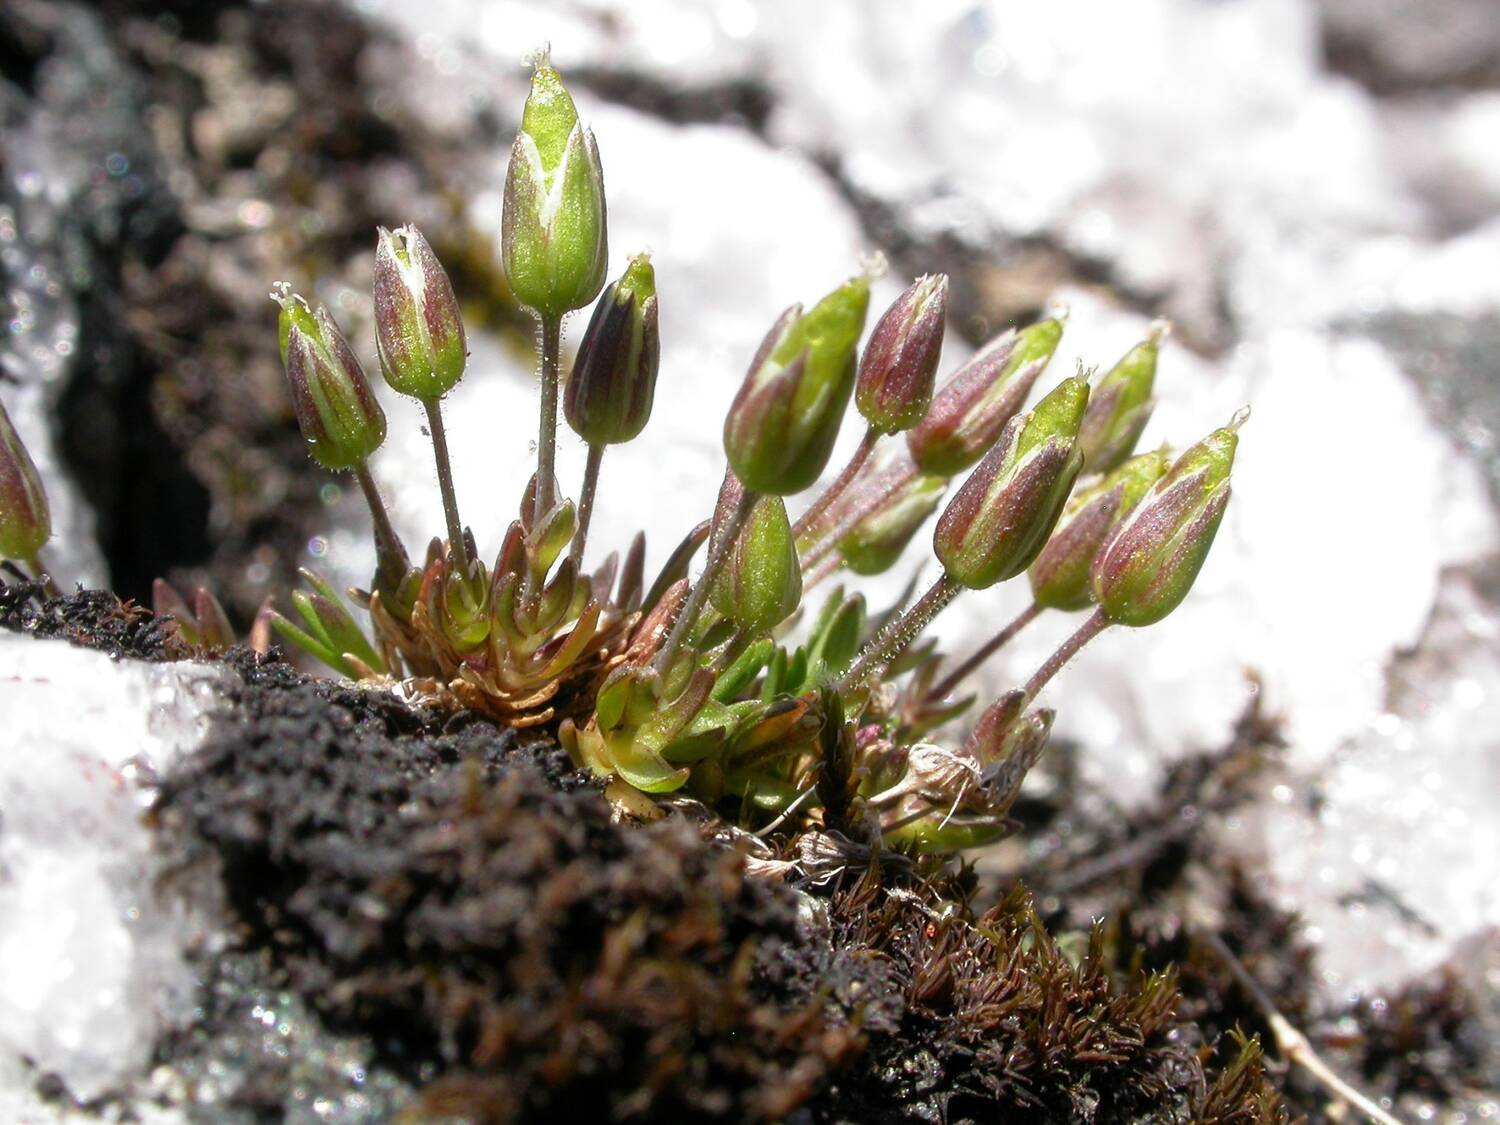 A close-up of a small plant growing on a rock, surrounded by clumps of snow. It has small waxy leaves close to the base, with reddish pods at the top of green stems.